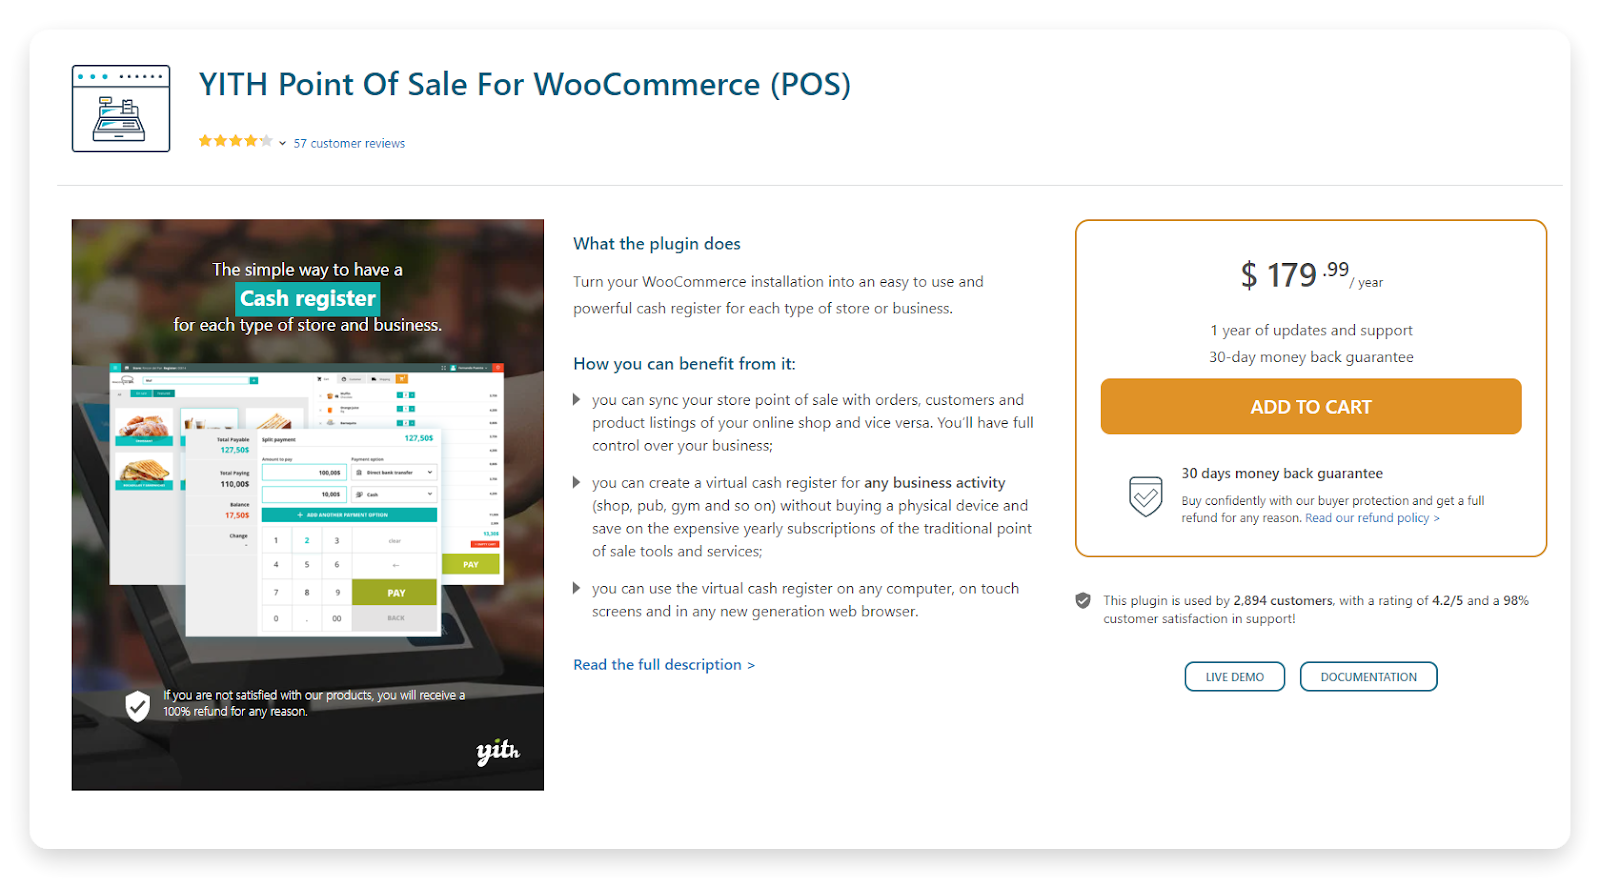 YITH Point Of Sale For WooCommerce